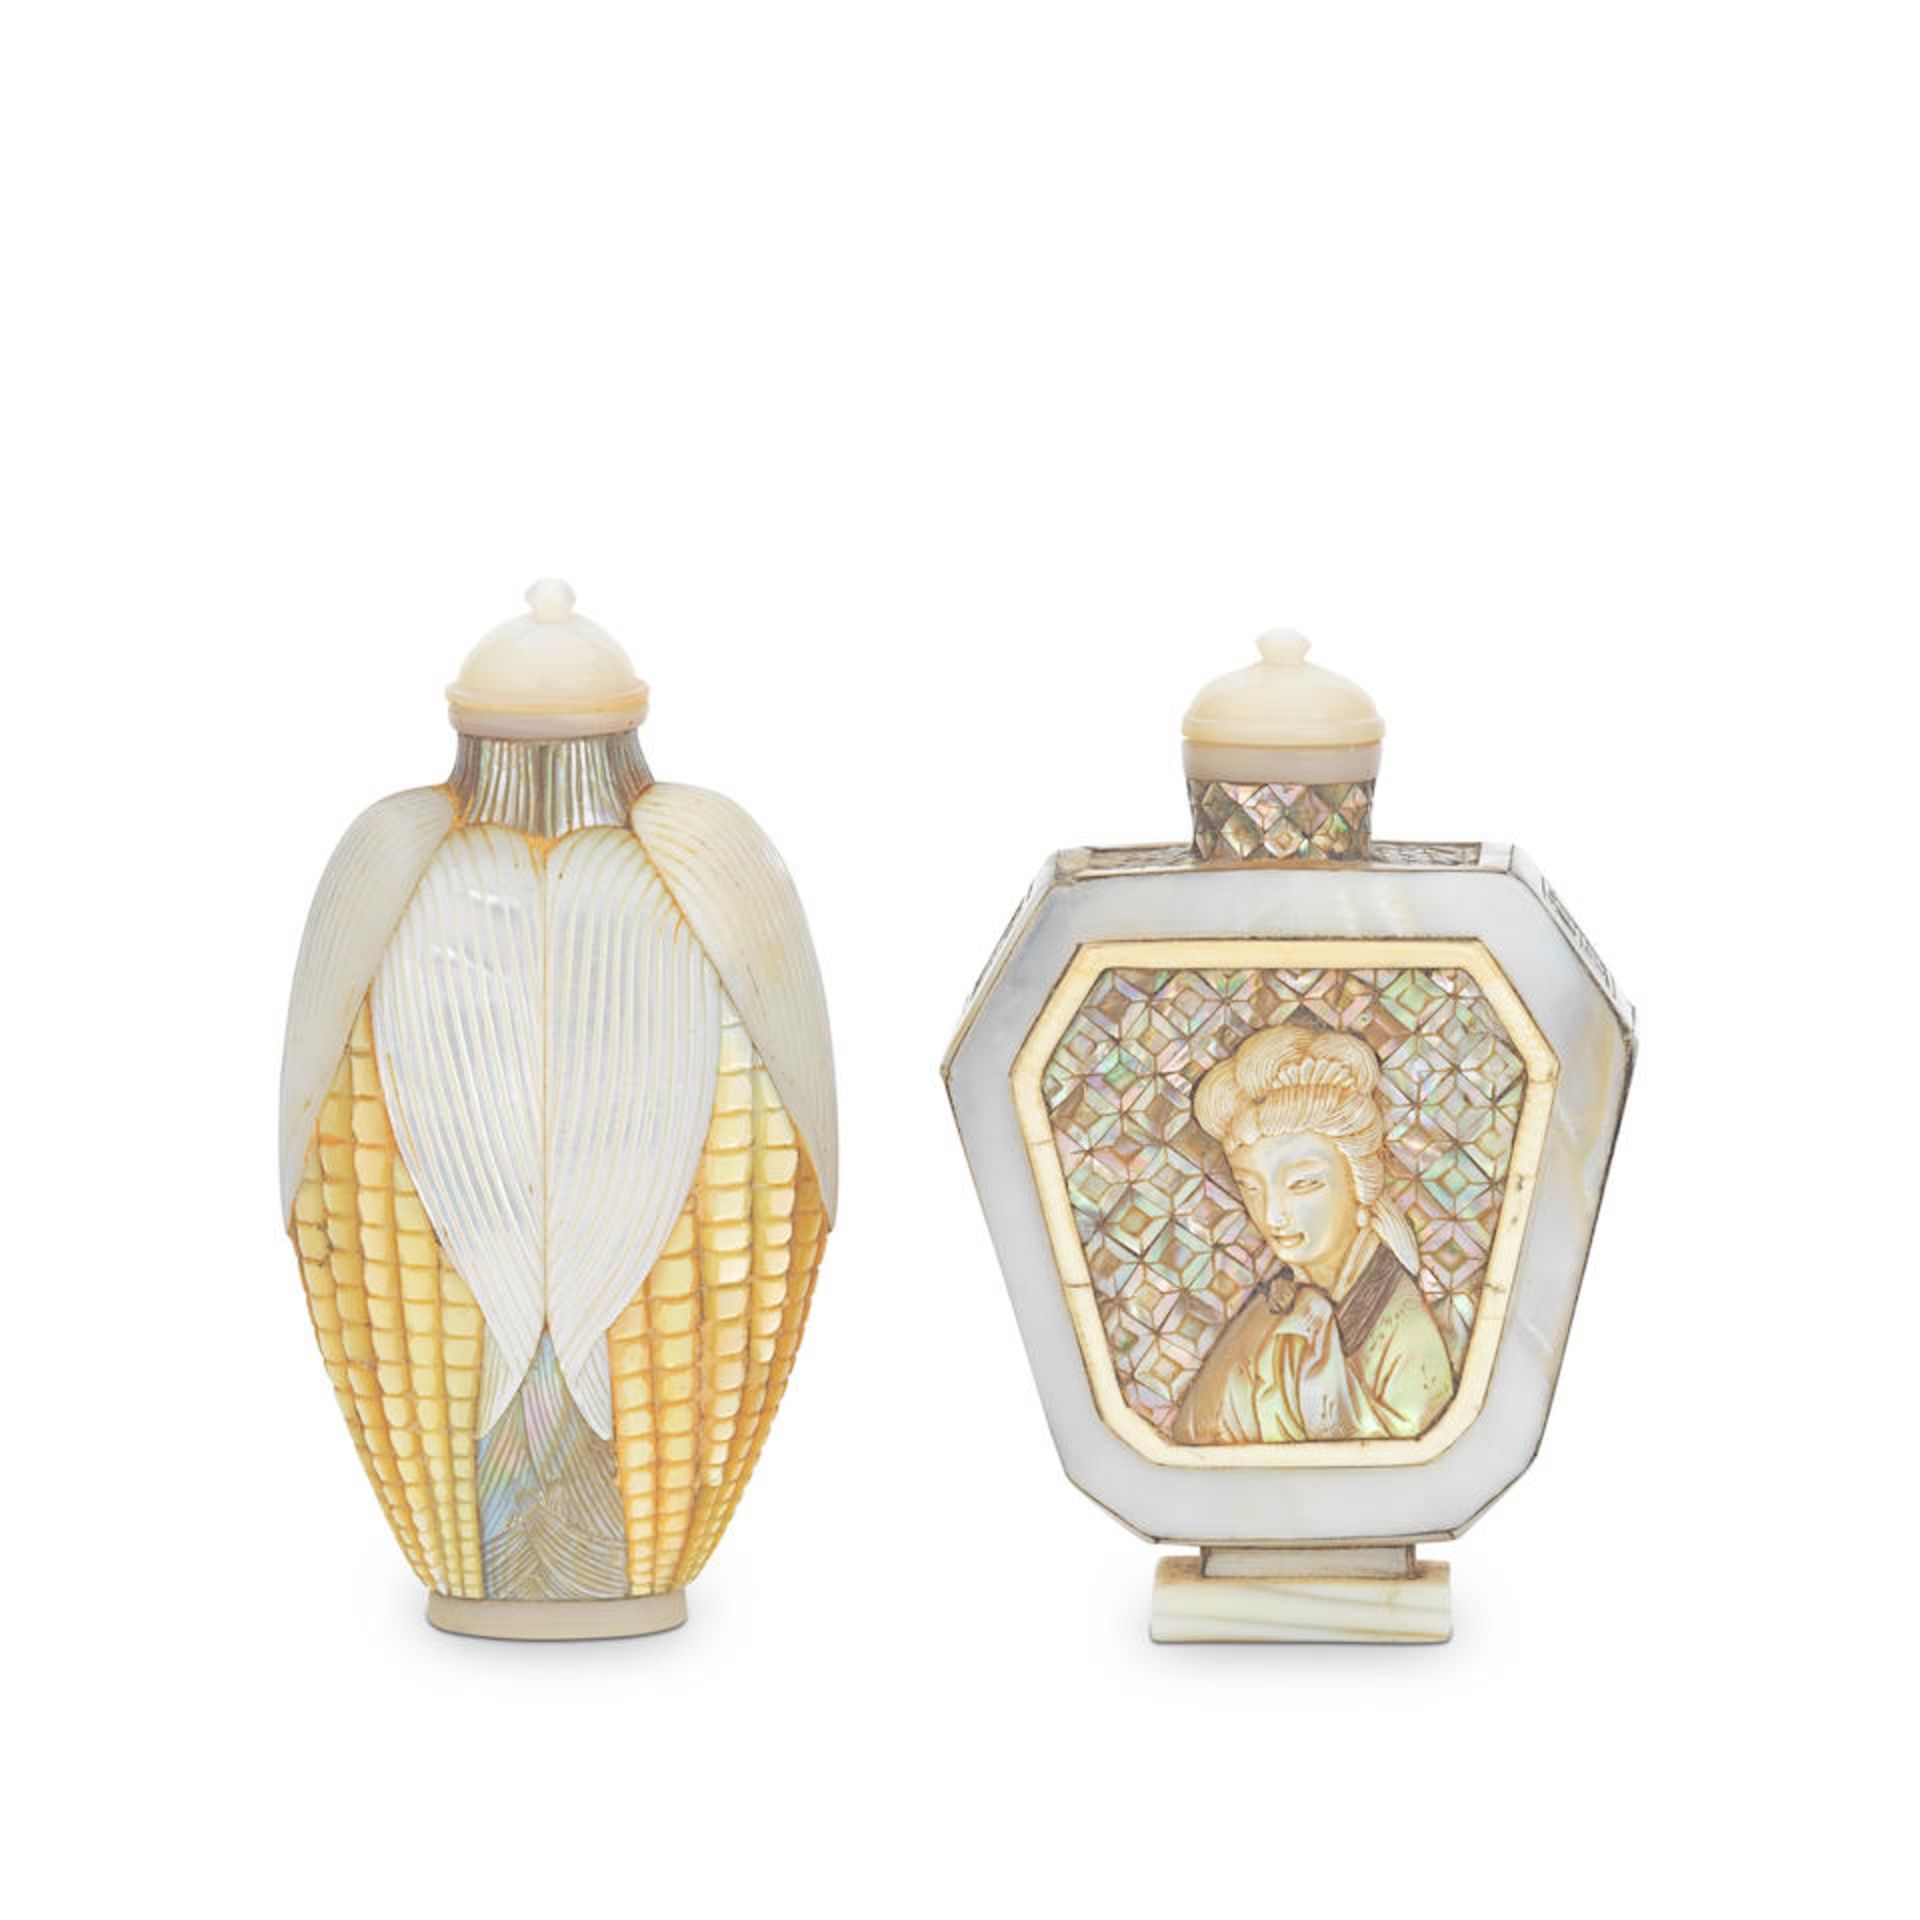 A MOTHER-OF-PEARL 'LADY' SNUFF BOTTLE AND A MOTHER-OF-PEARL 'CORN' BOTTLE Qing Dynasty (5)